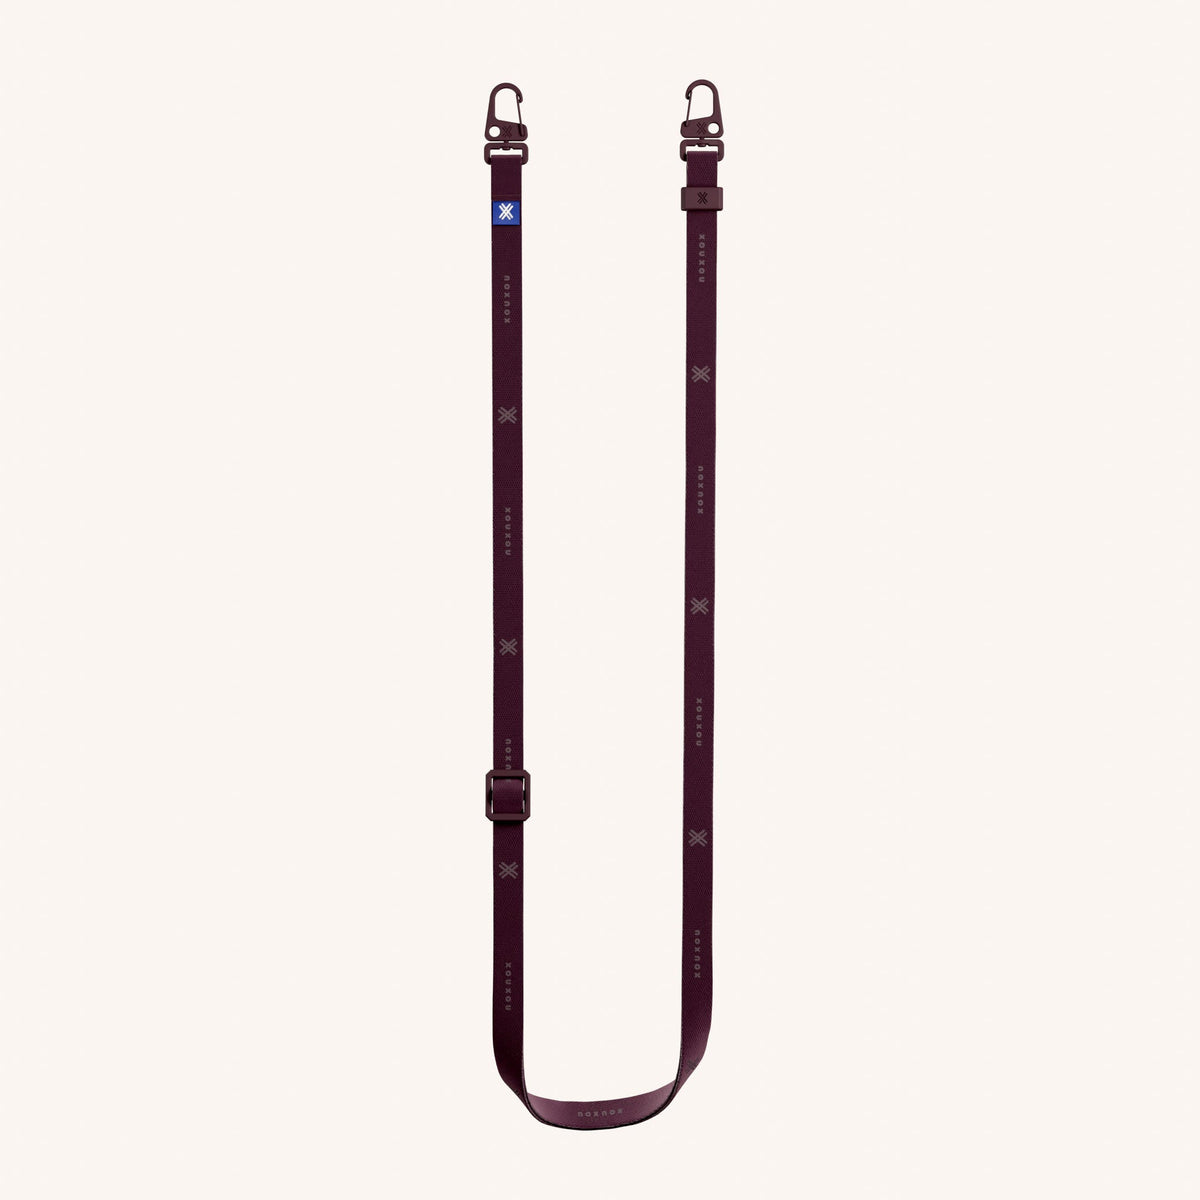 Modular Slim Lanyards for Phone Cases and Bags | XOUXOU®